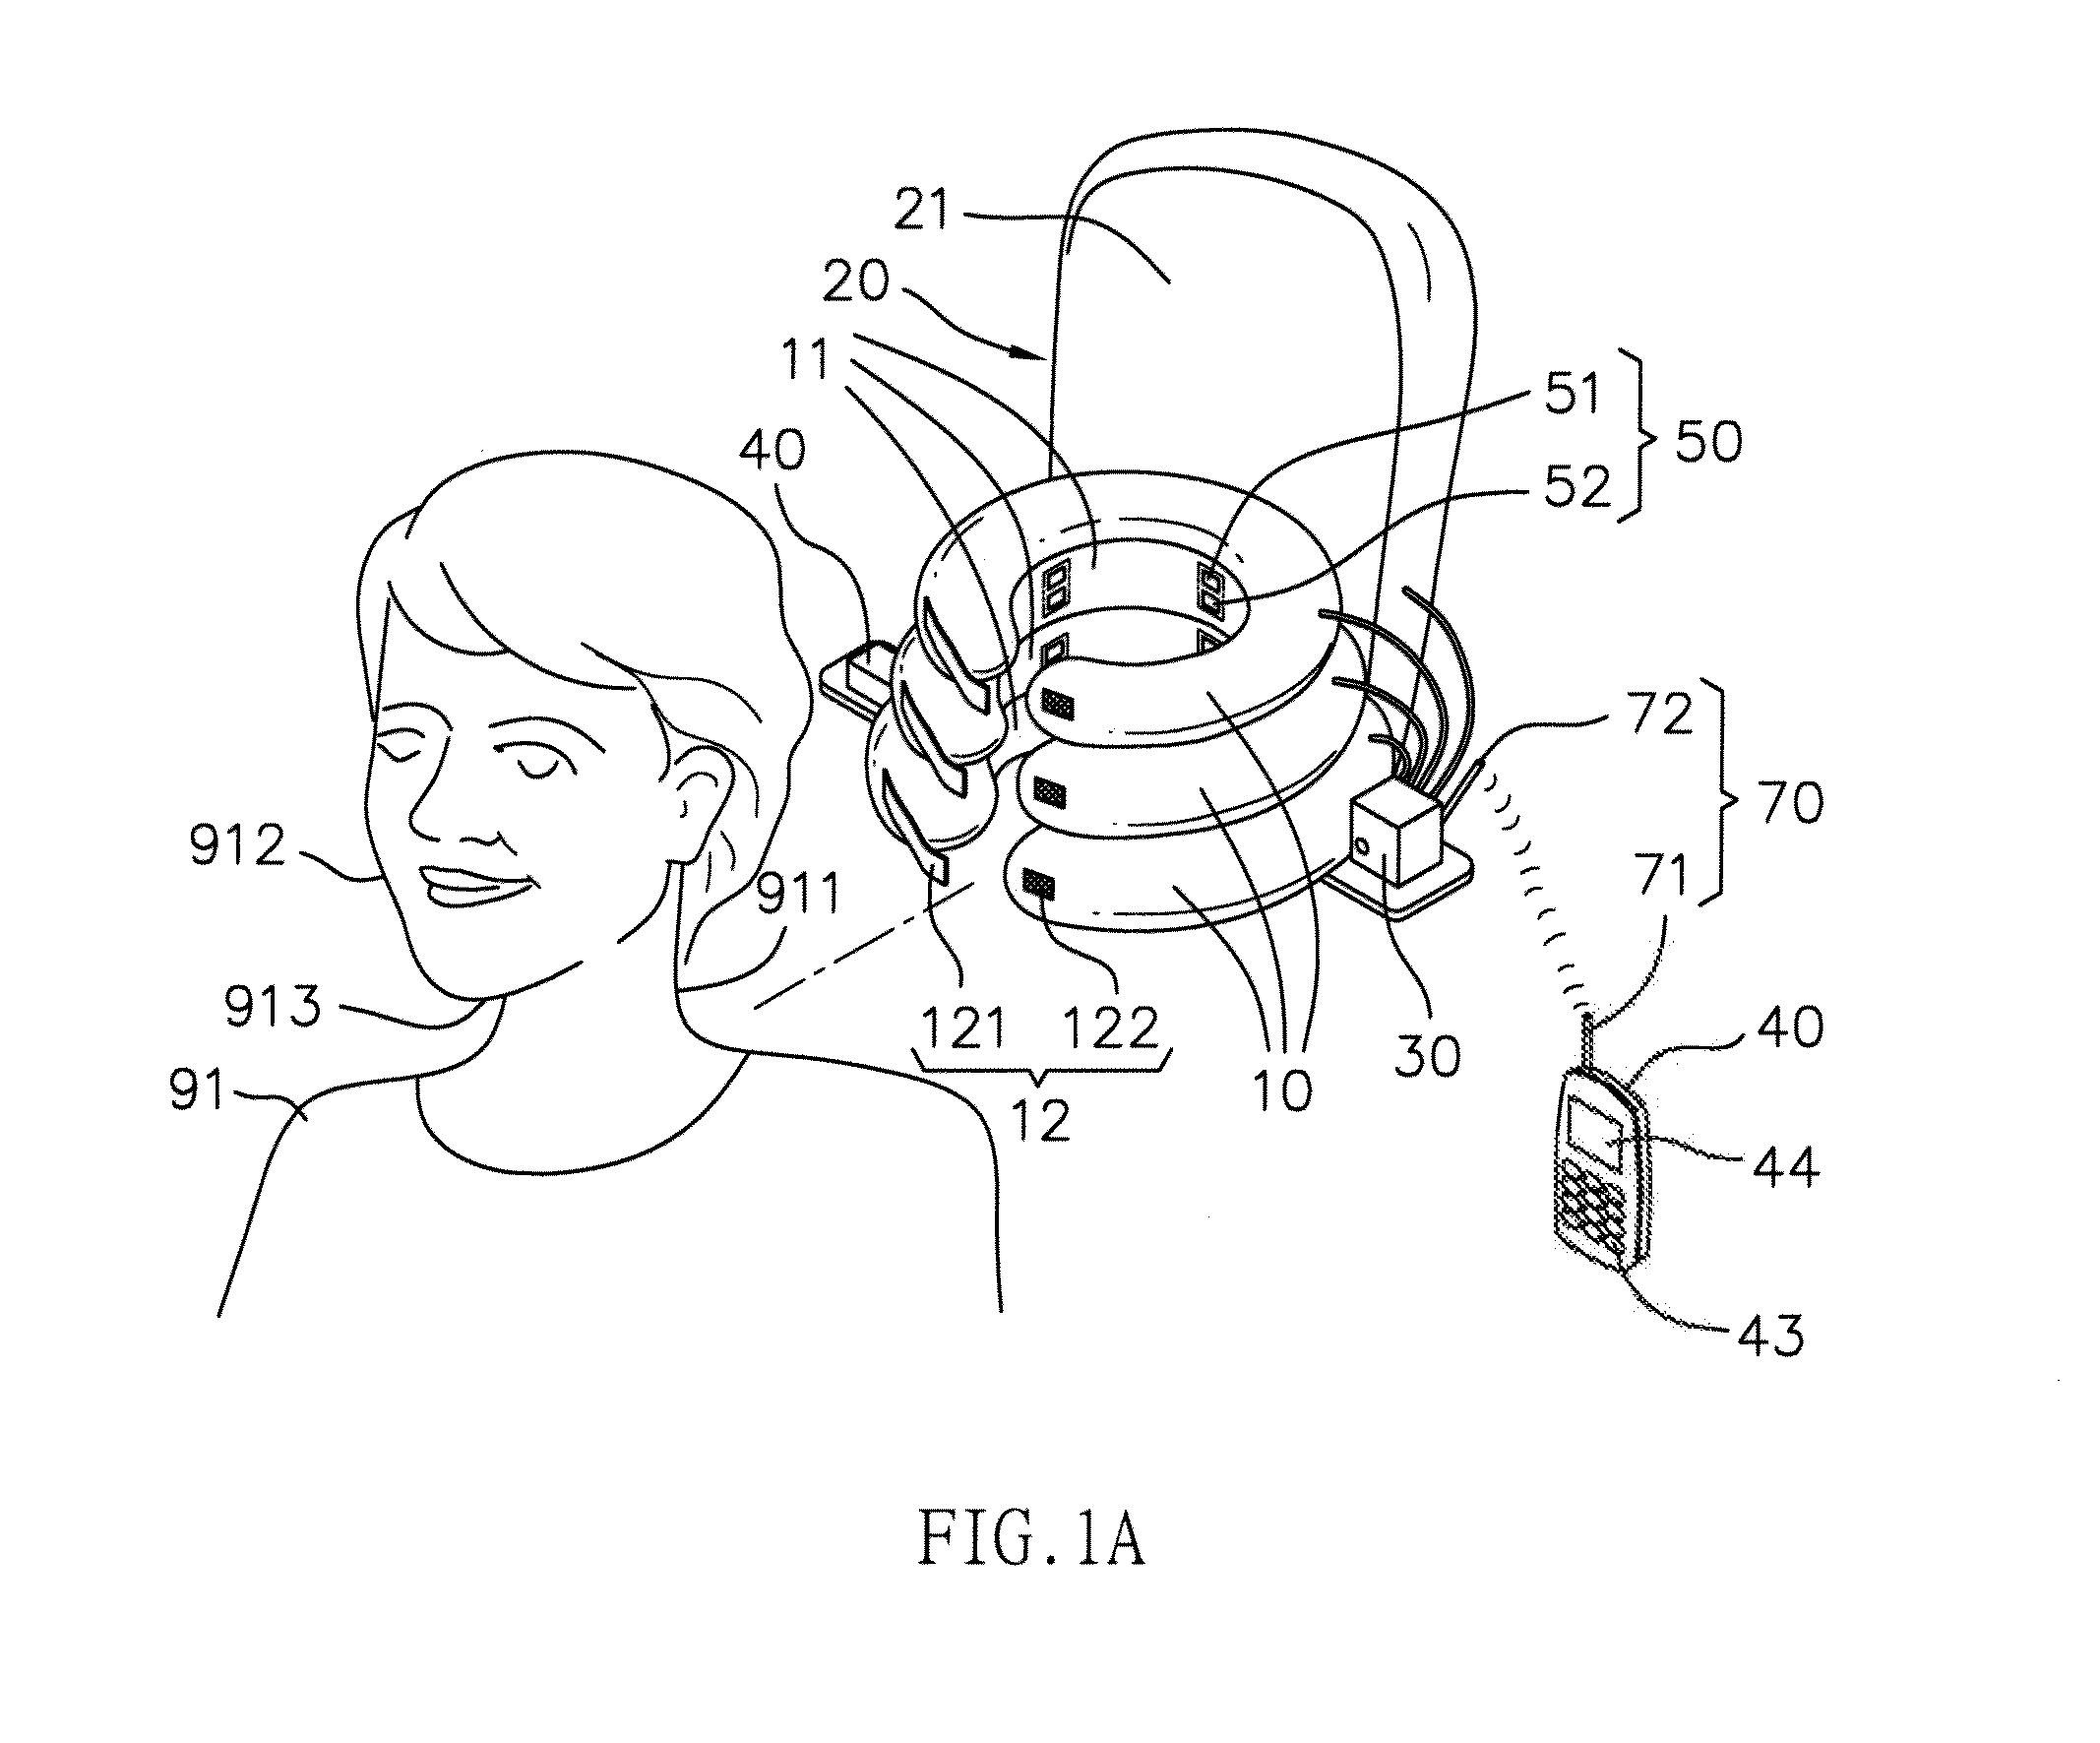 Inflation type cervical vertebrae rehabilitation device and method for using the same